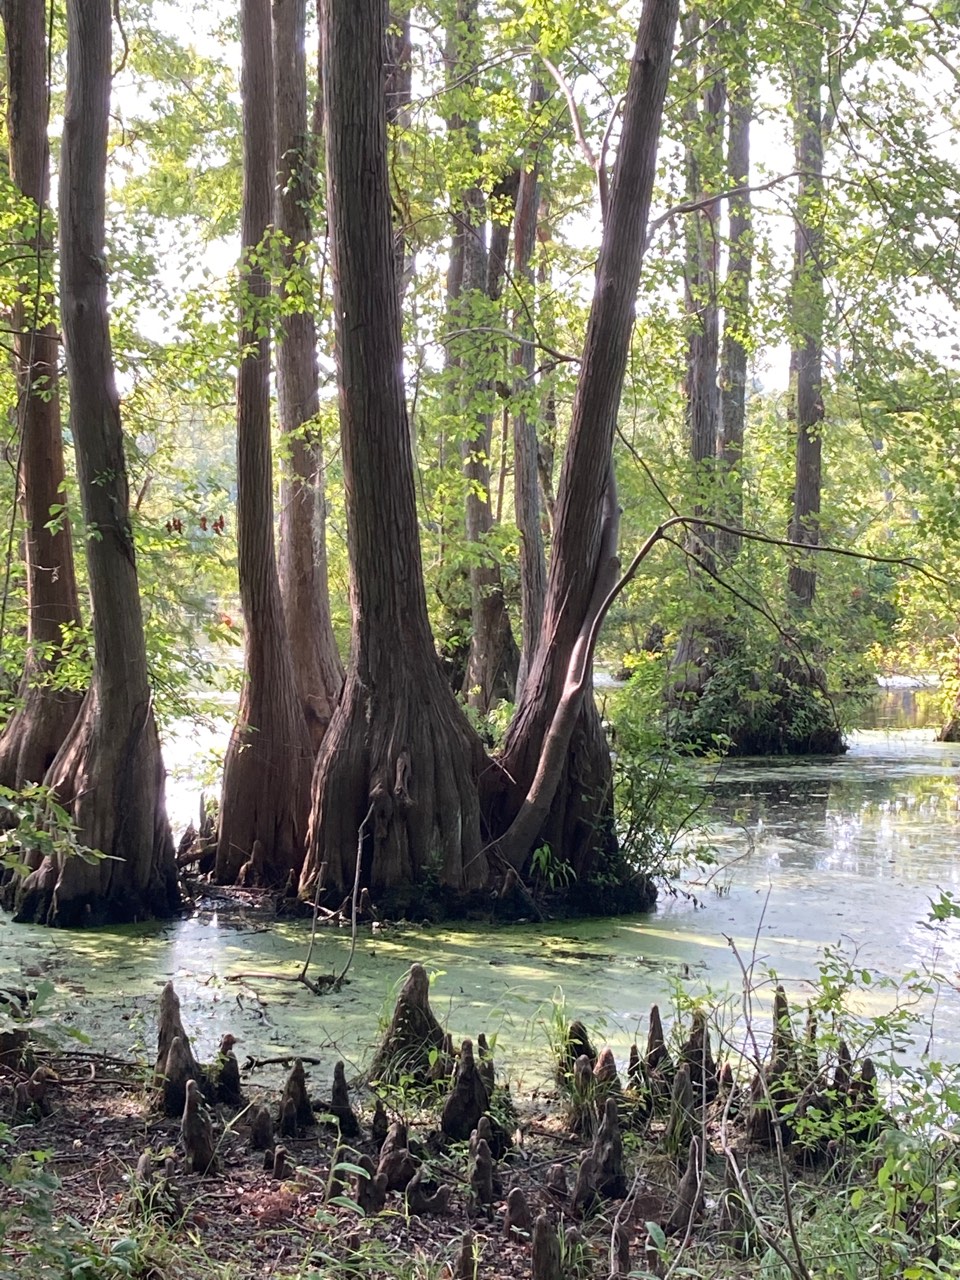 The Scientific Name is Taxodium distichum. You will likely hear them called Bald Cypress, Baldcypress, Swamp Cypress. This picture shows the Buttressed base of trunk and 